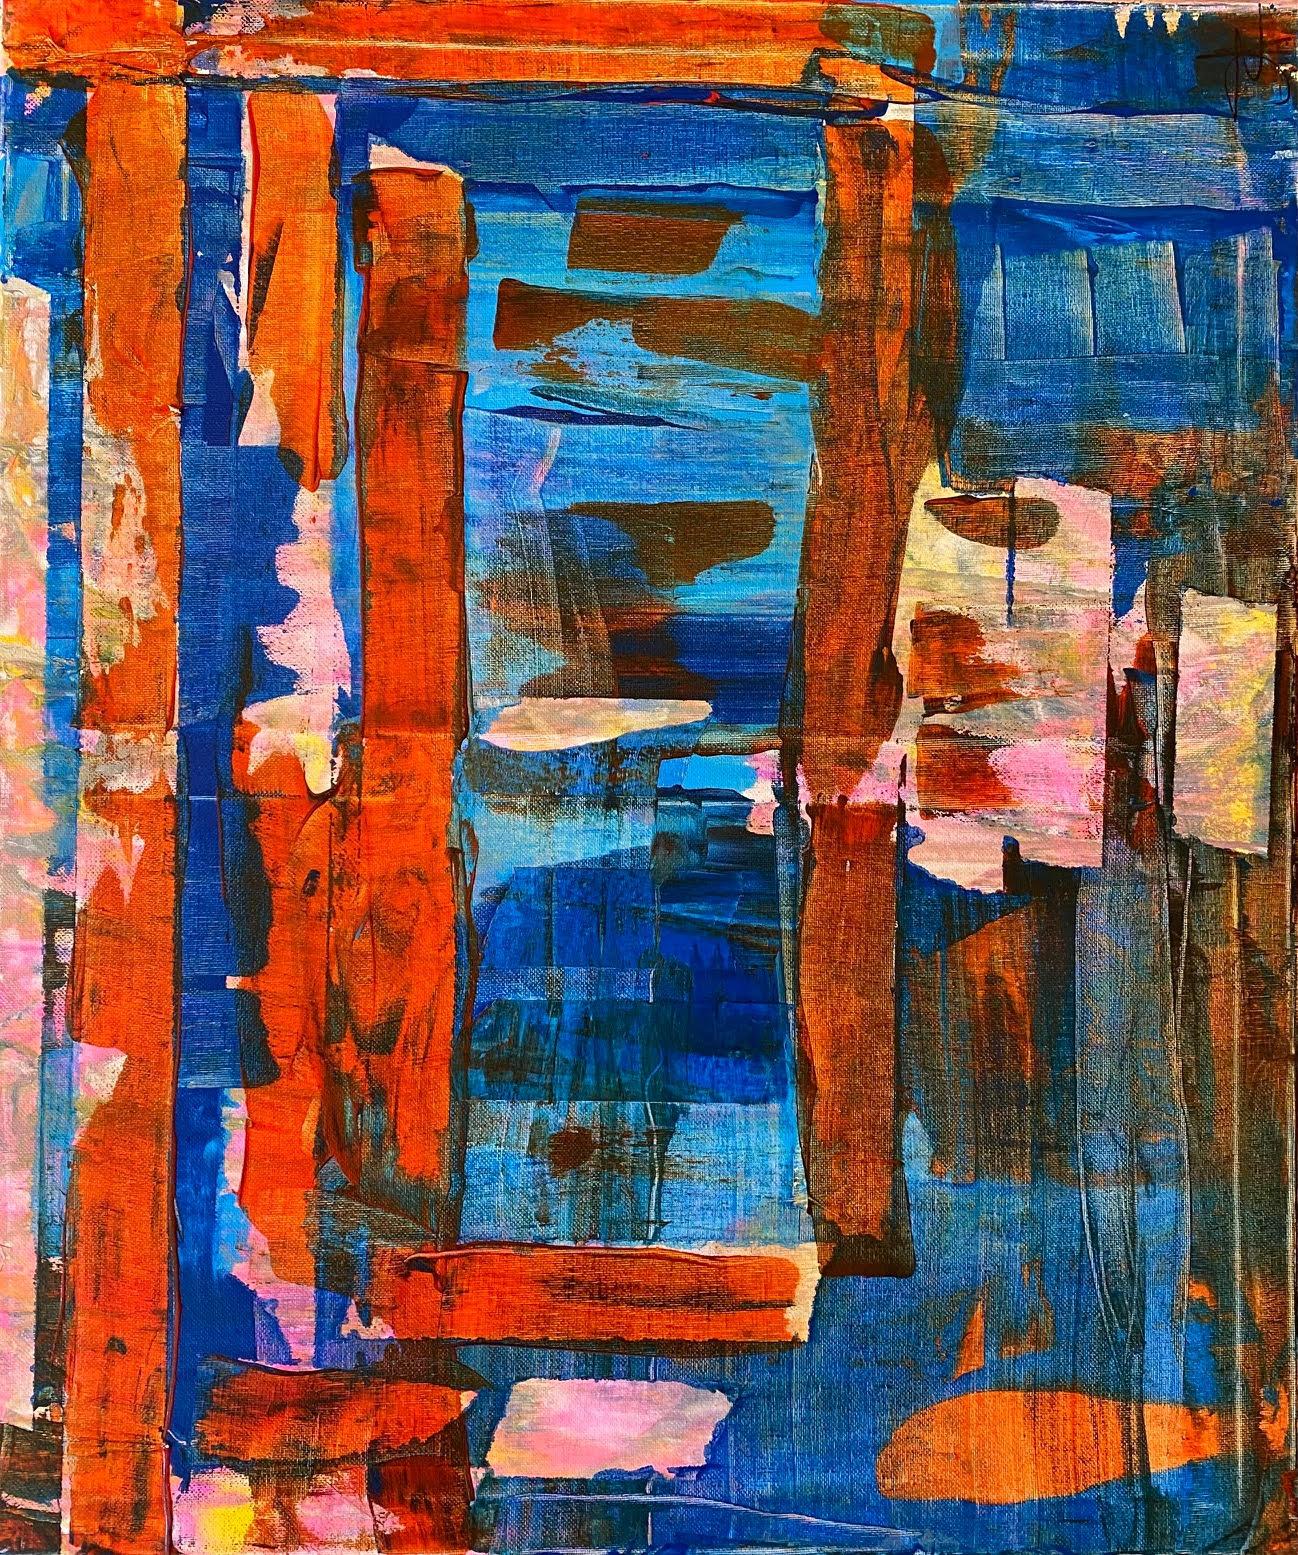 Nan Van Ryzin Abstract Painting - "Untitled" Contemporary Abstract Red & Blue Oil On Canvas By Nan